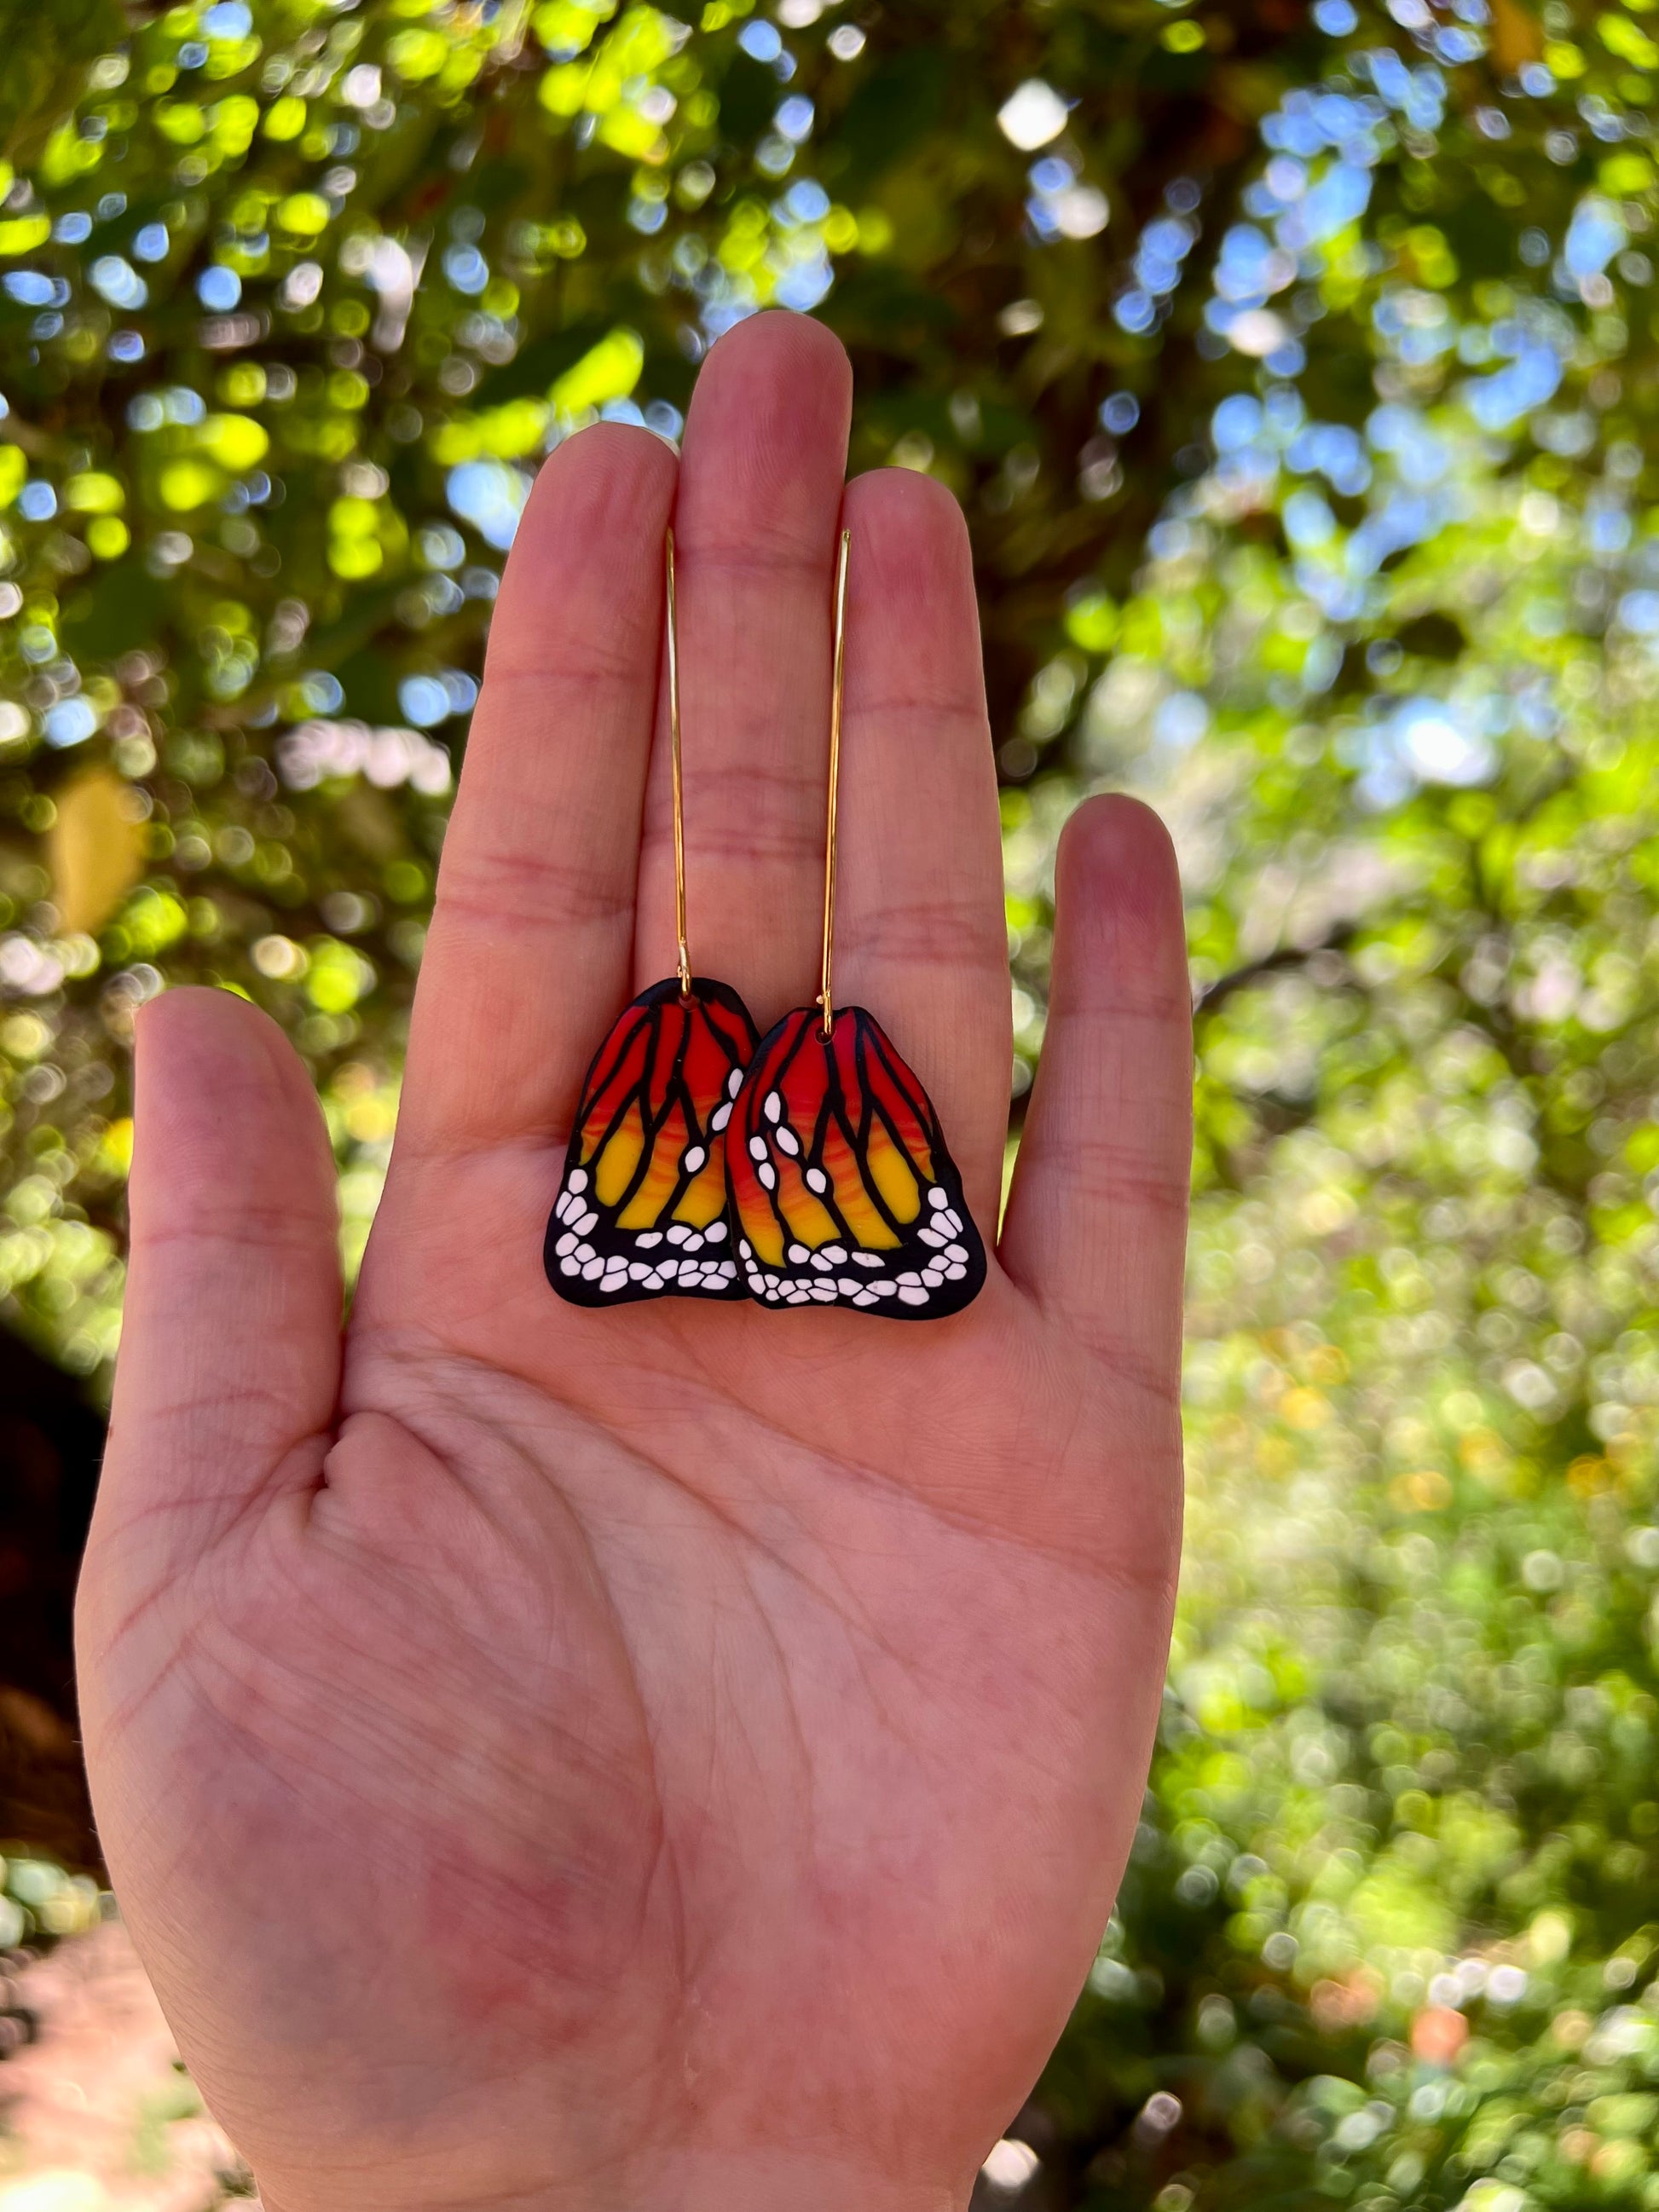 Celebrate the symbolism of the monarch butterfly with our handmade polymer clay earrings. Representing strength and rebirth, each pair is crafted with meticulous attention to detail using the Cane technique.